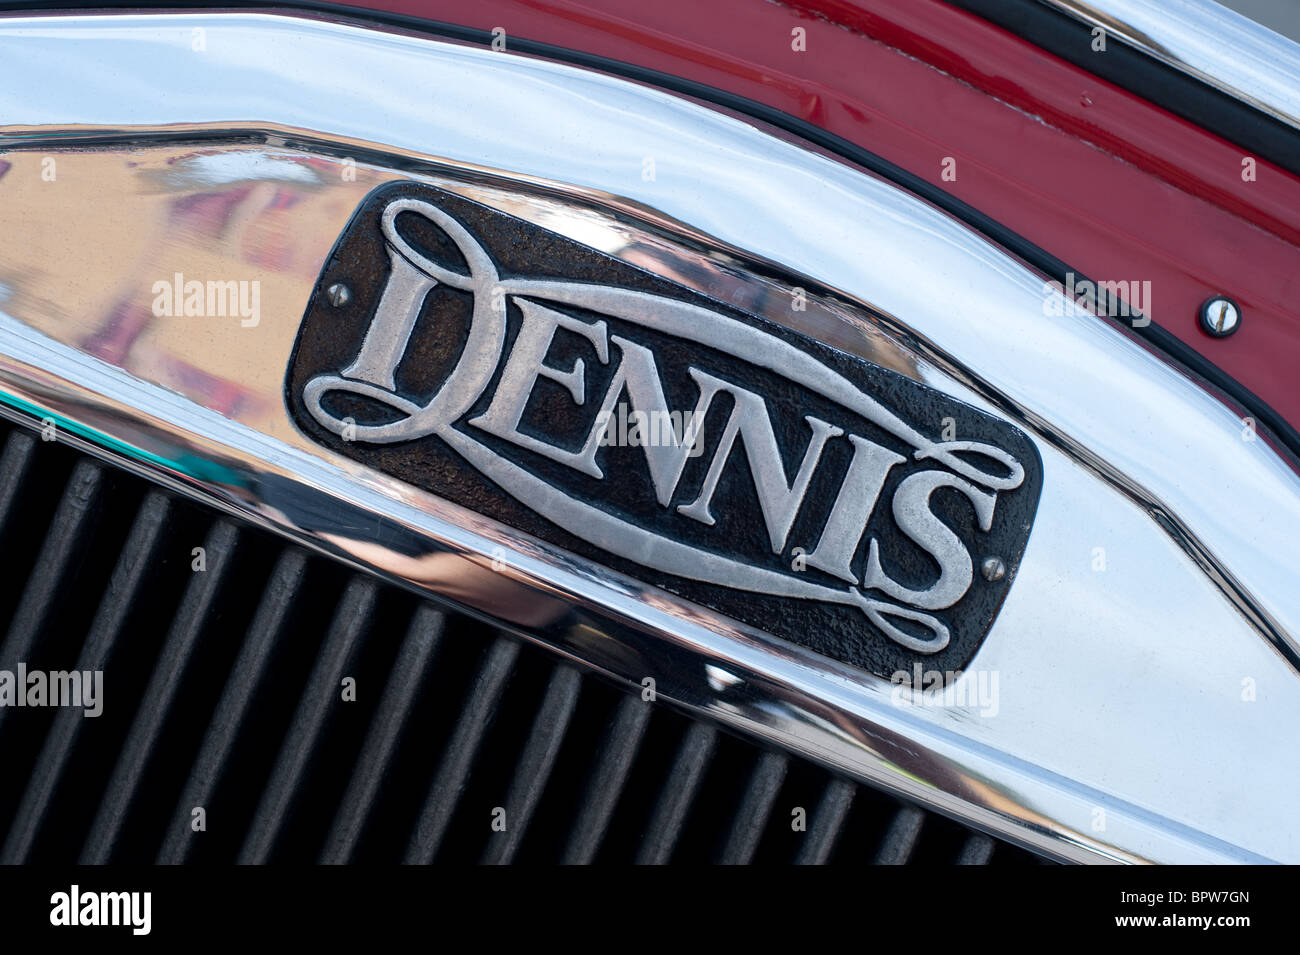 Dennis Badge / Logo from the front of a vintage British fire engine Stock Photo